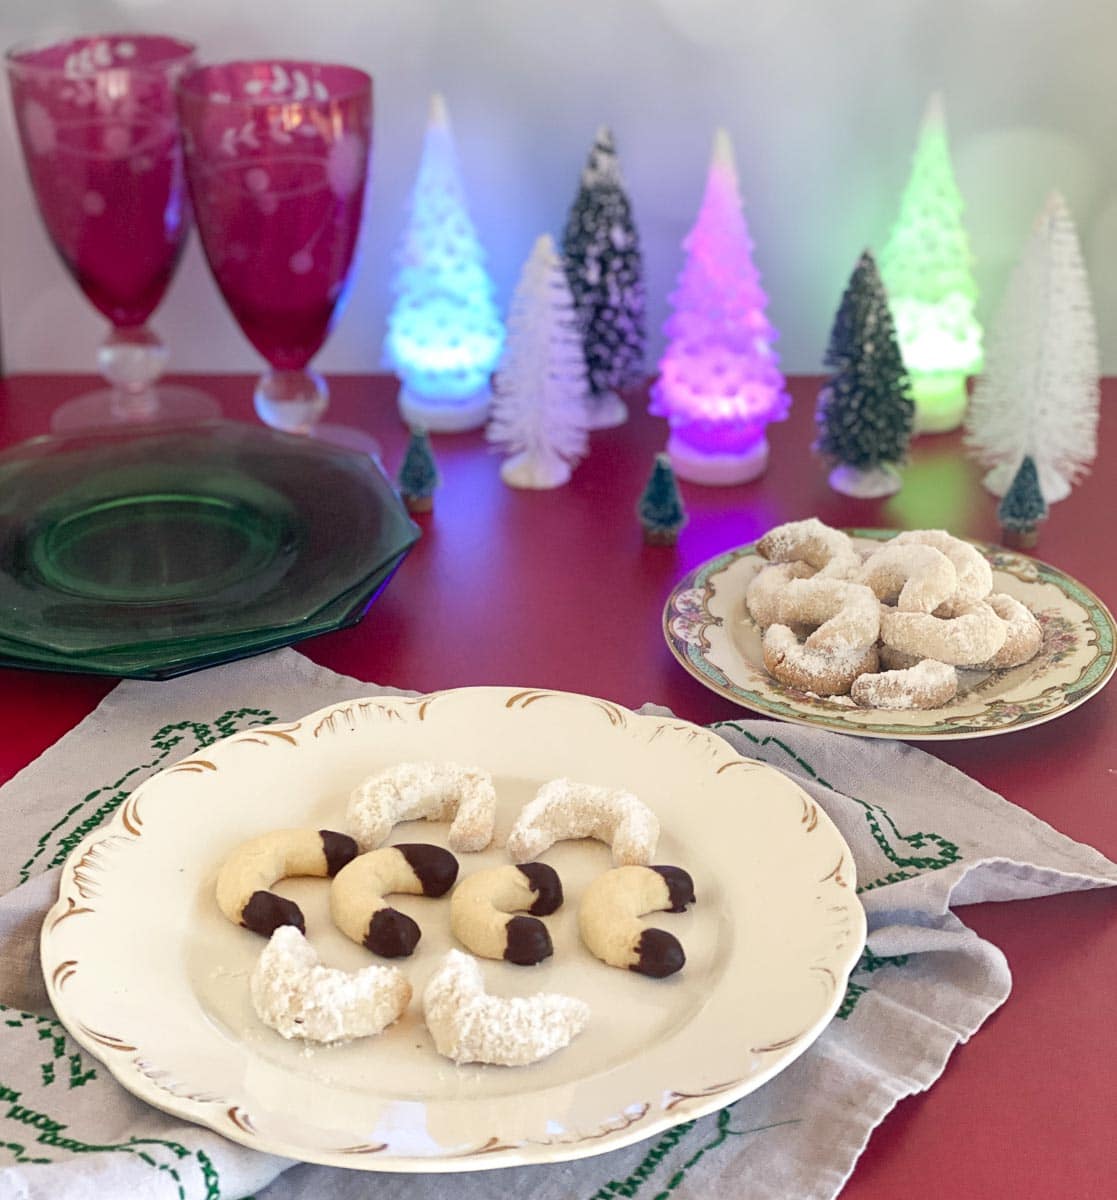 Low FODMAP Vanilla Crescent Cookies on decorative plates; red background and lit Christmas trees